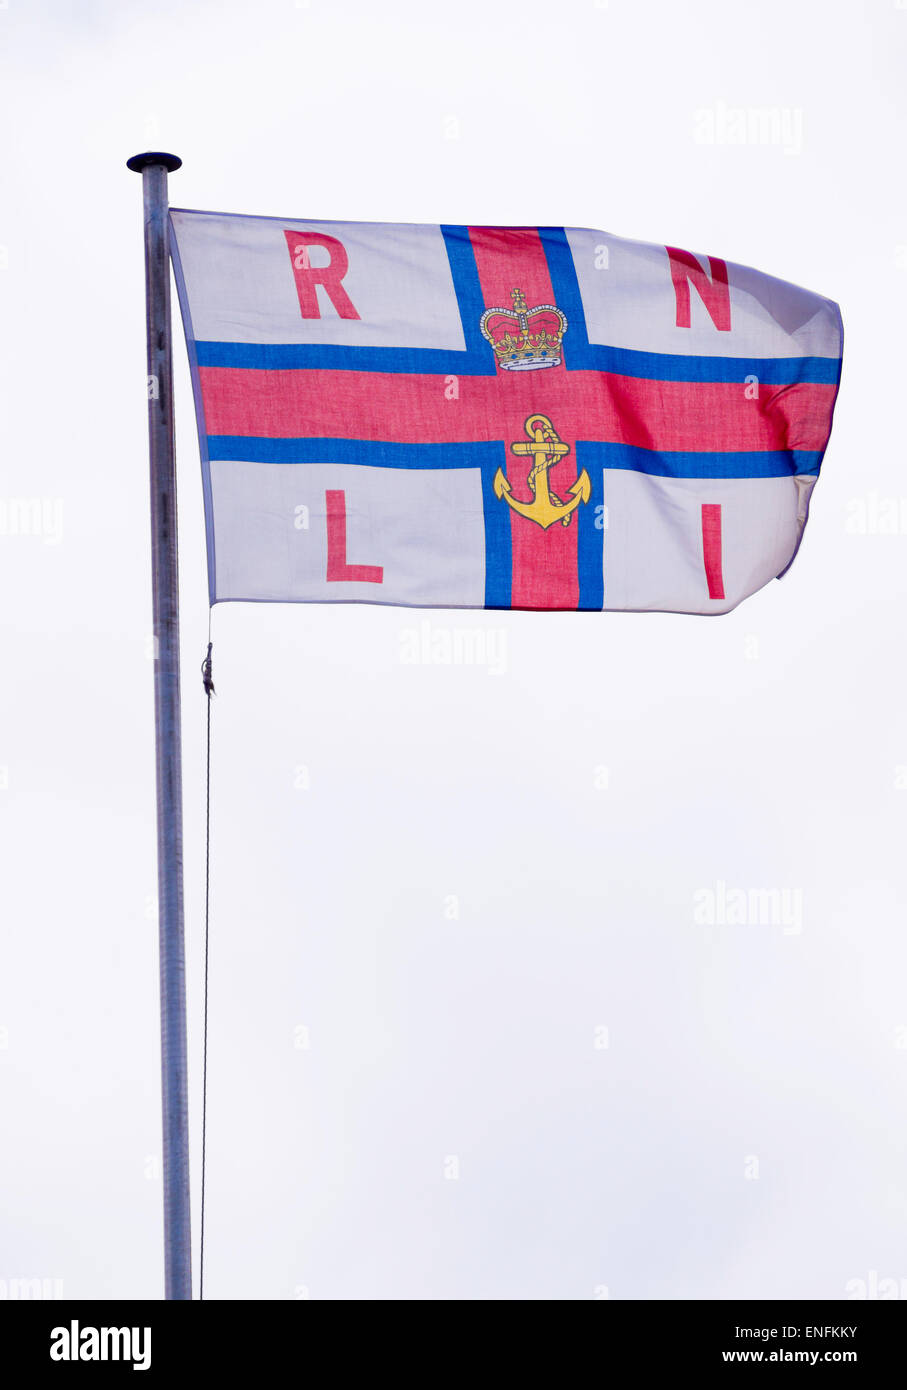 RNLI Royal National Lifeboat Institution Flag Stock Photo